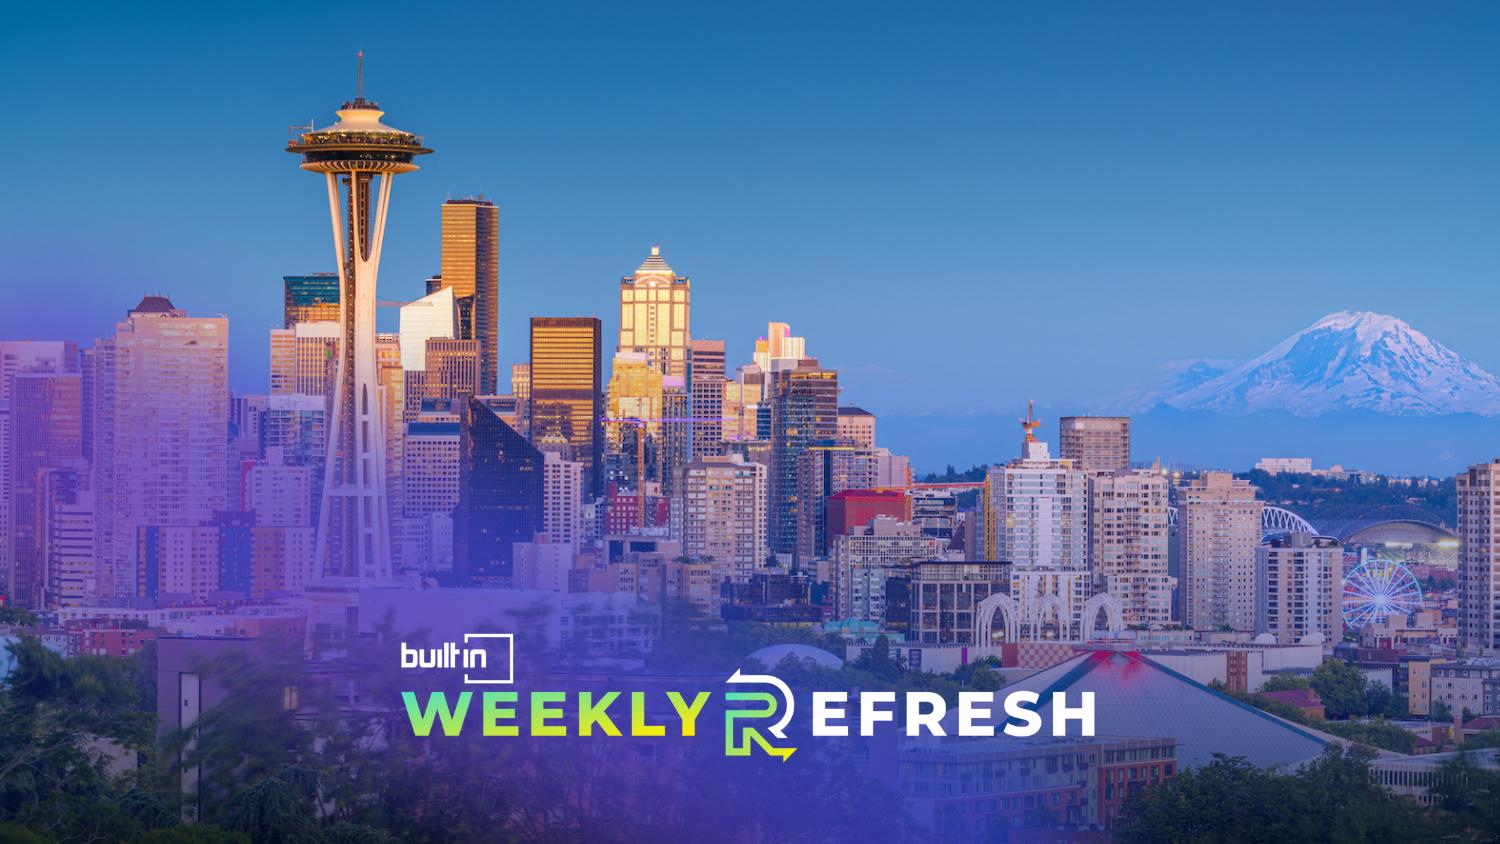 Pulled in 5M, Humanly Got 12M, and More Seattle Tech News